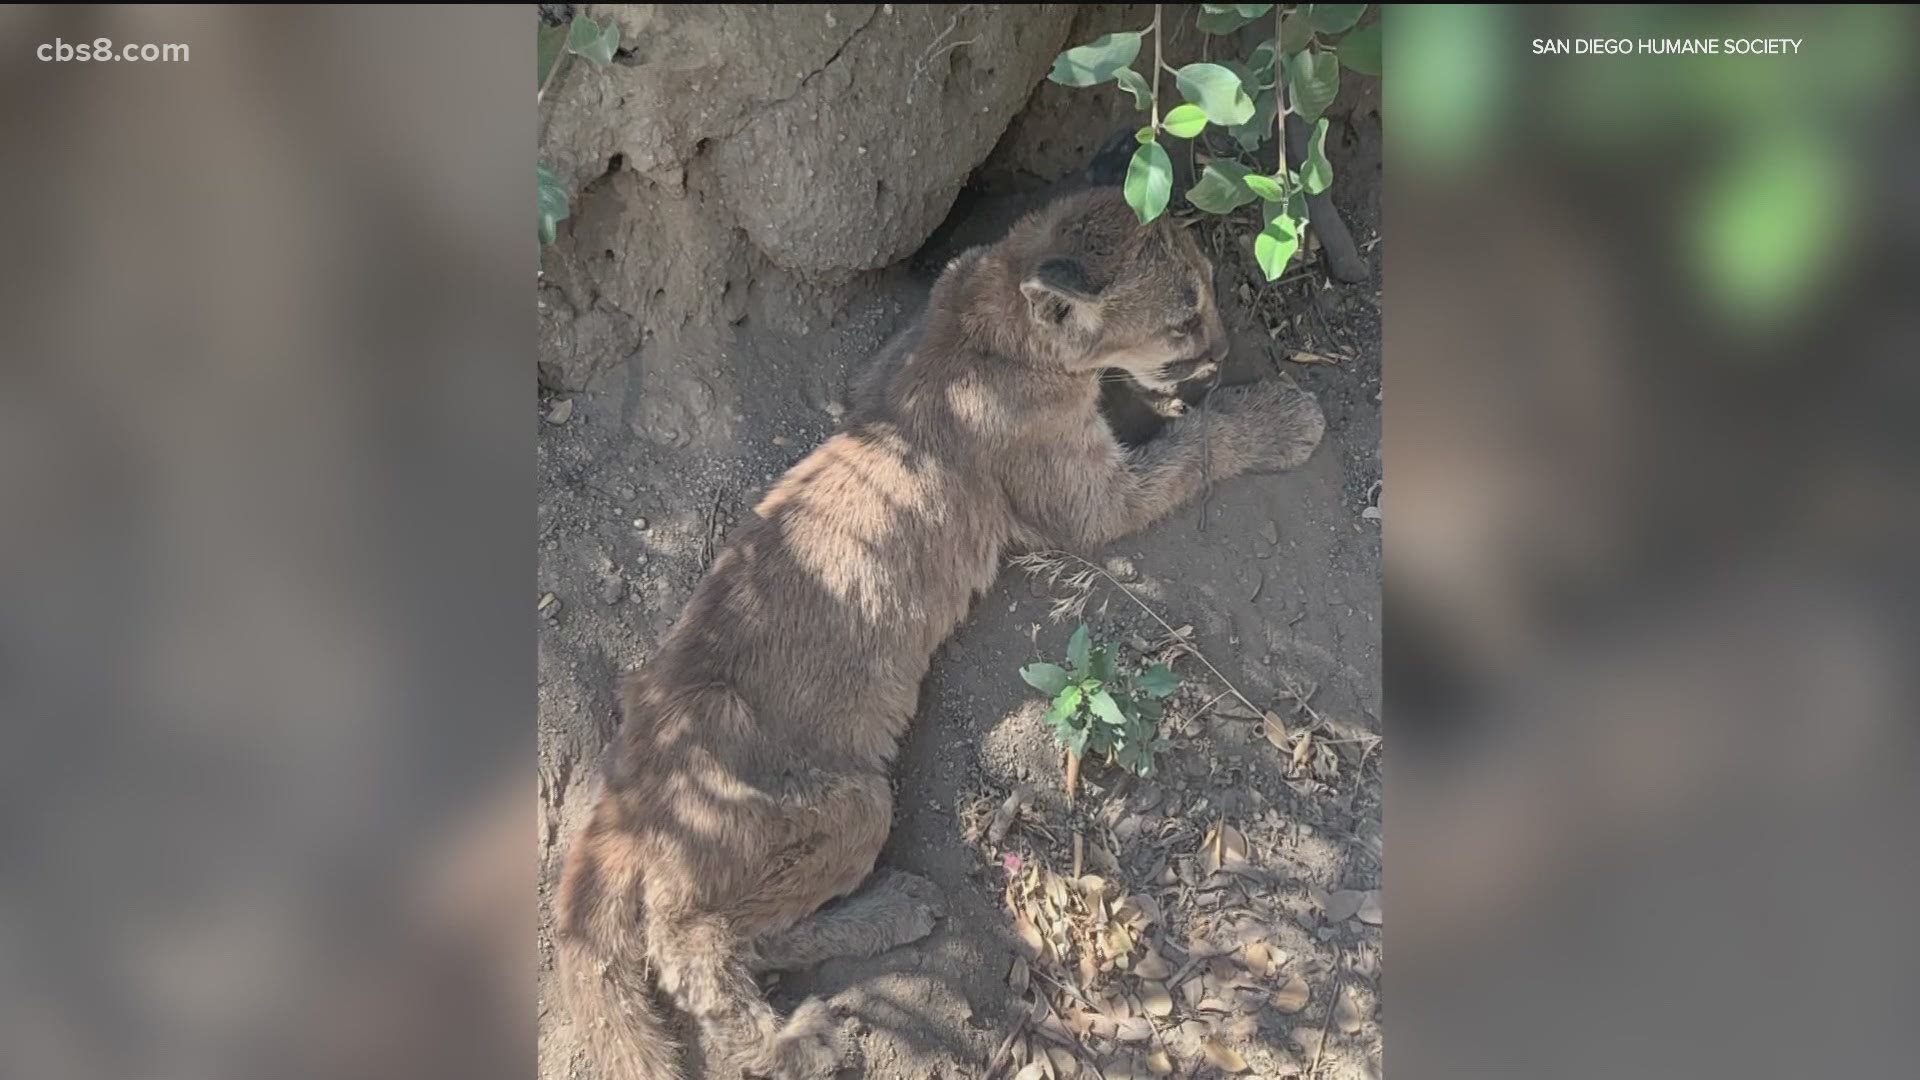 An orphaned mountain lion cub who arrived at San Diego Humane Society’s Project Wildlife, Ramona Campus was in critical condition but finally feeling better.